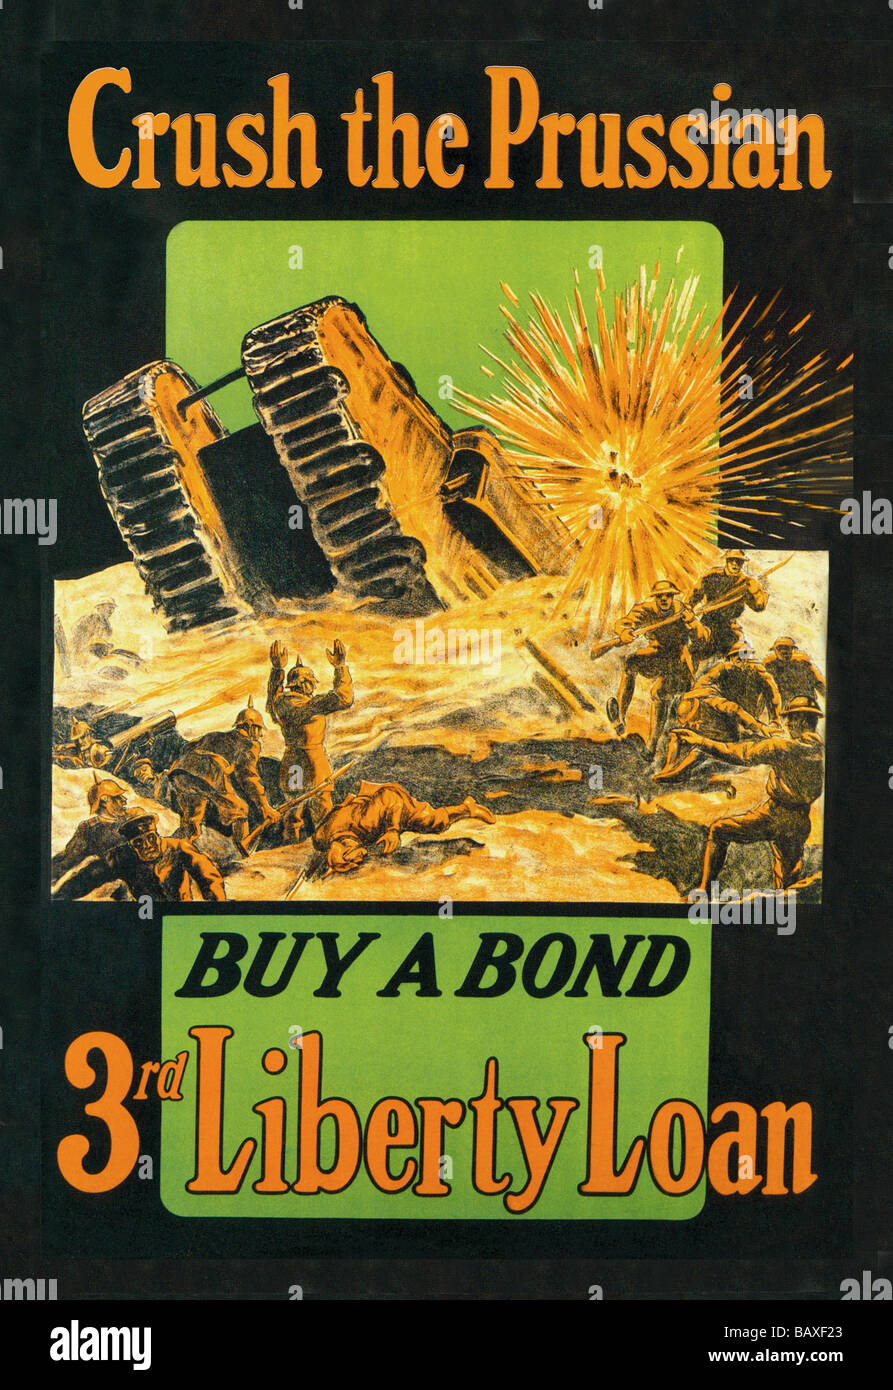 Crush the Prussian: Buy a Bond Stock Photo